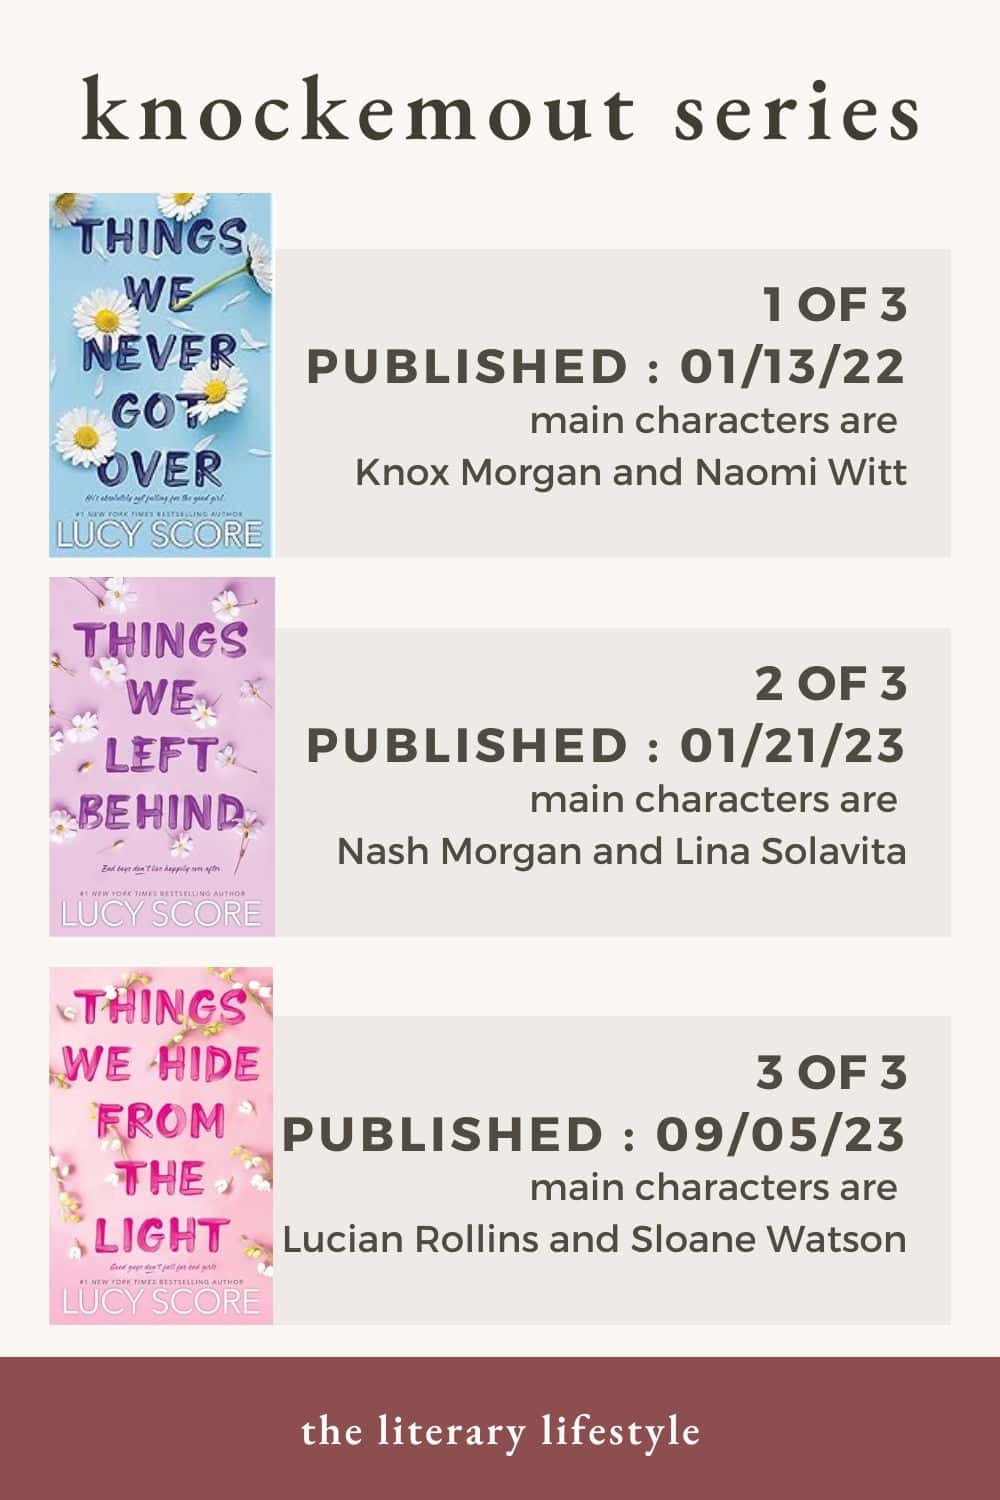 Lucy Score's Things We Never Got Over Series (Knockemout)